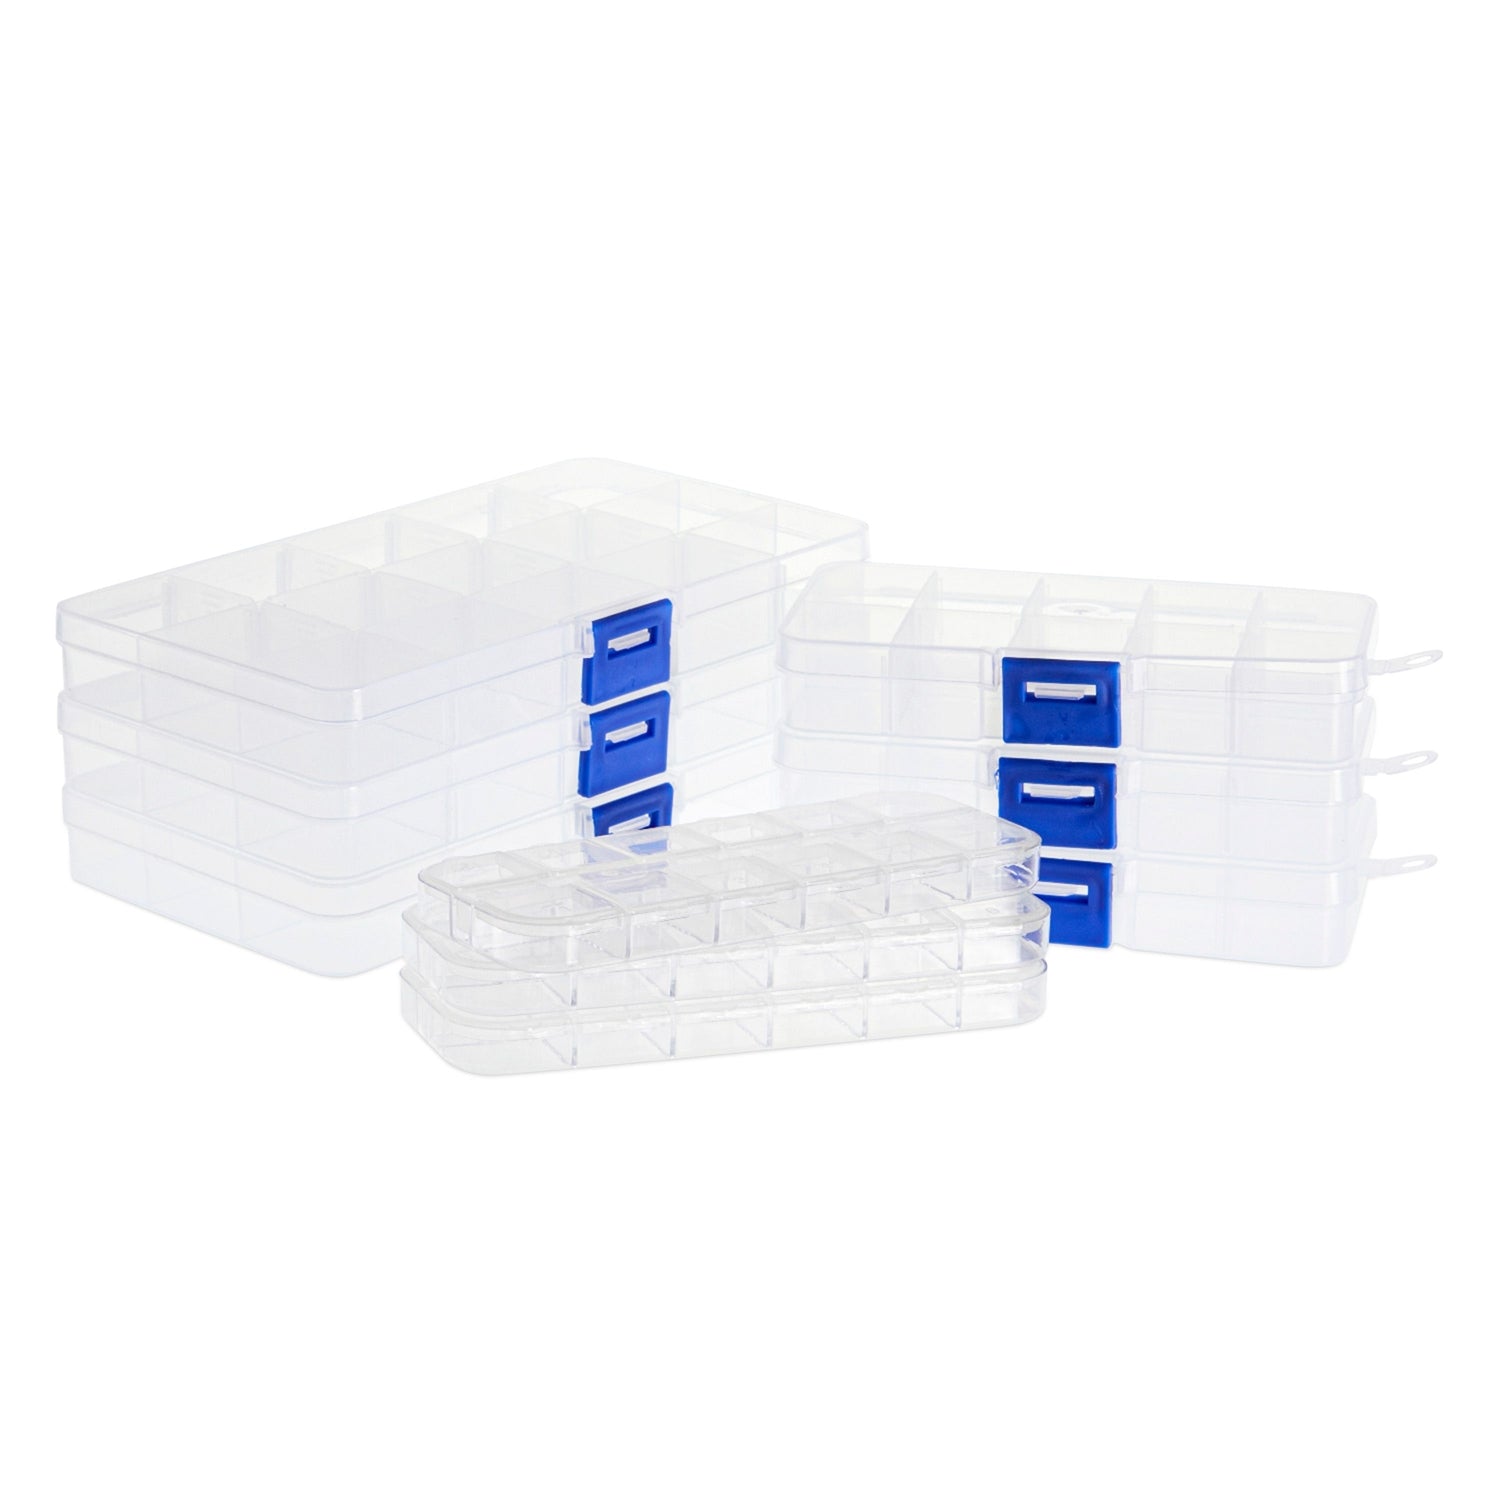 3-Tier Plastic Craft Storage Containers with 30 Compartments, 40